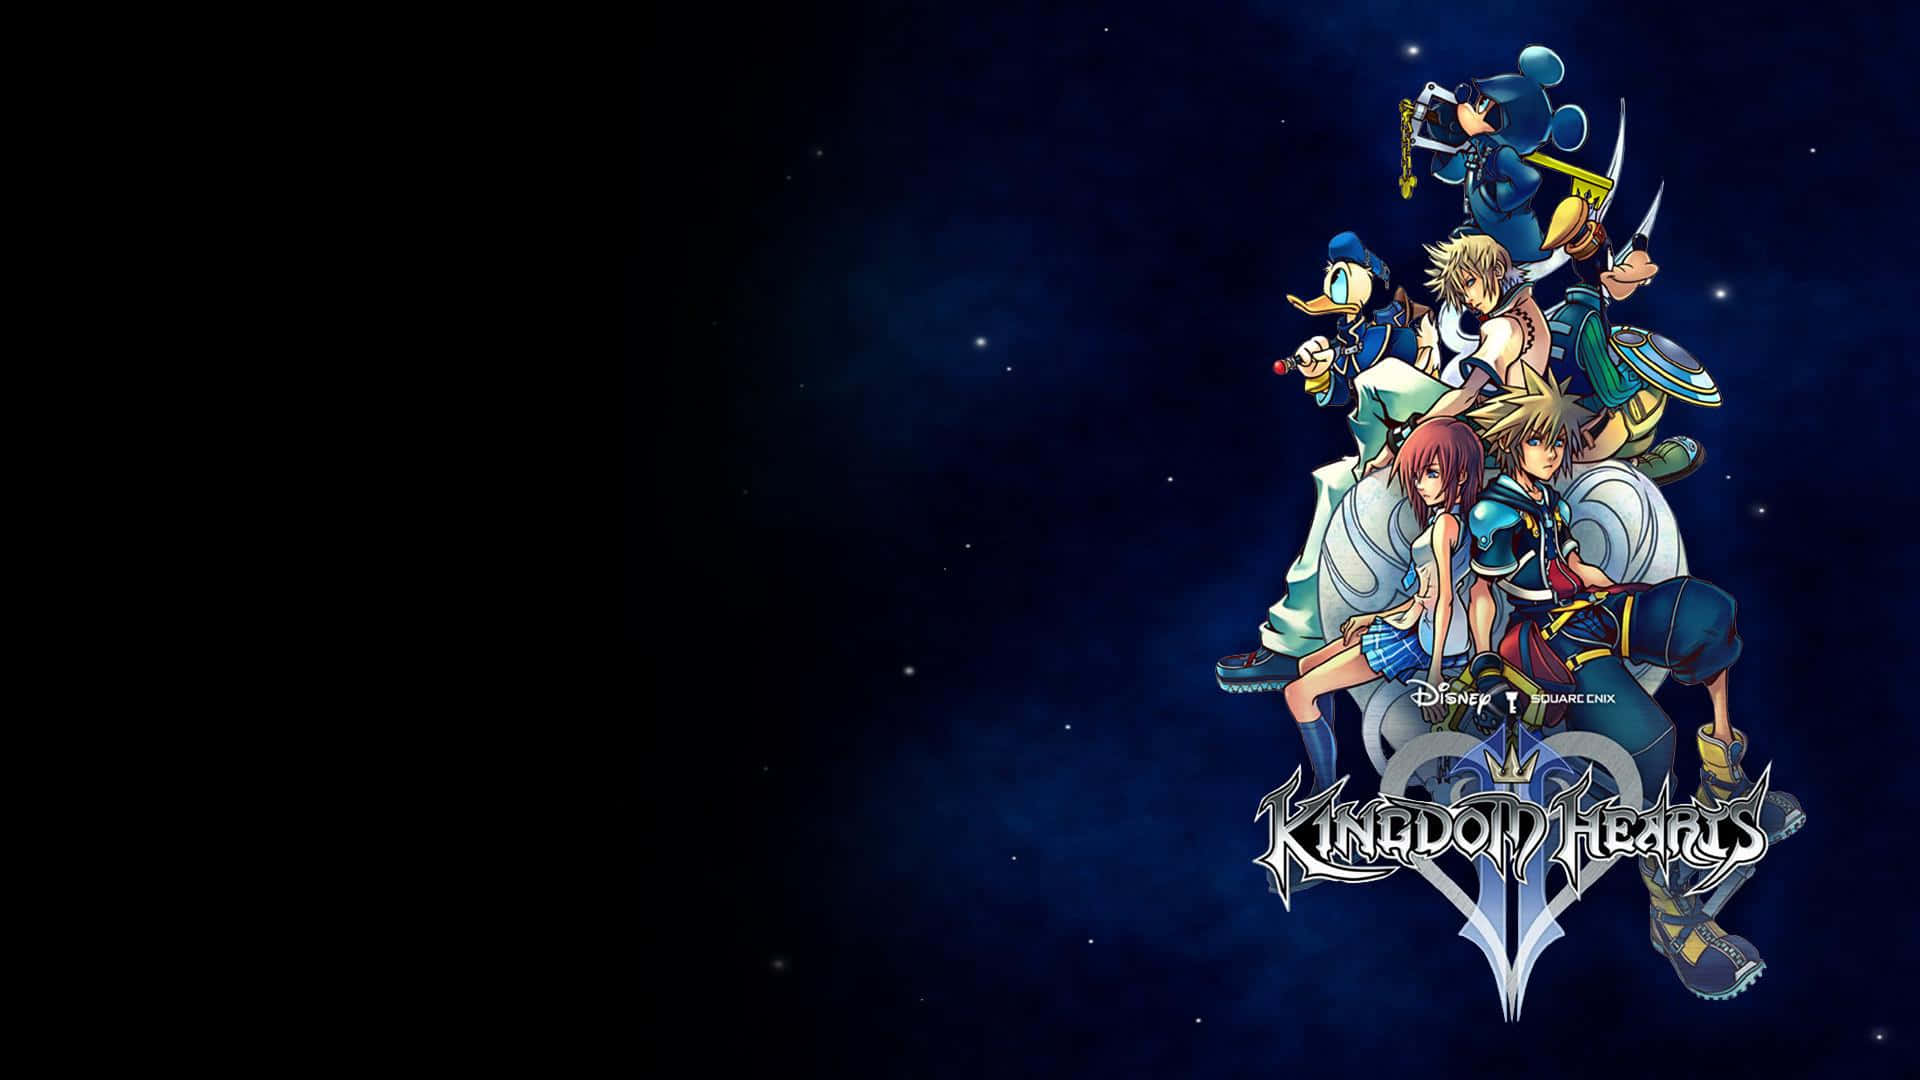 Riku In Action: Showcasing Power And Grace In Kingdom Hearts Wallpaper